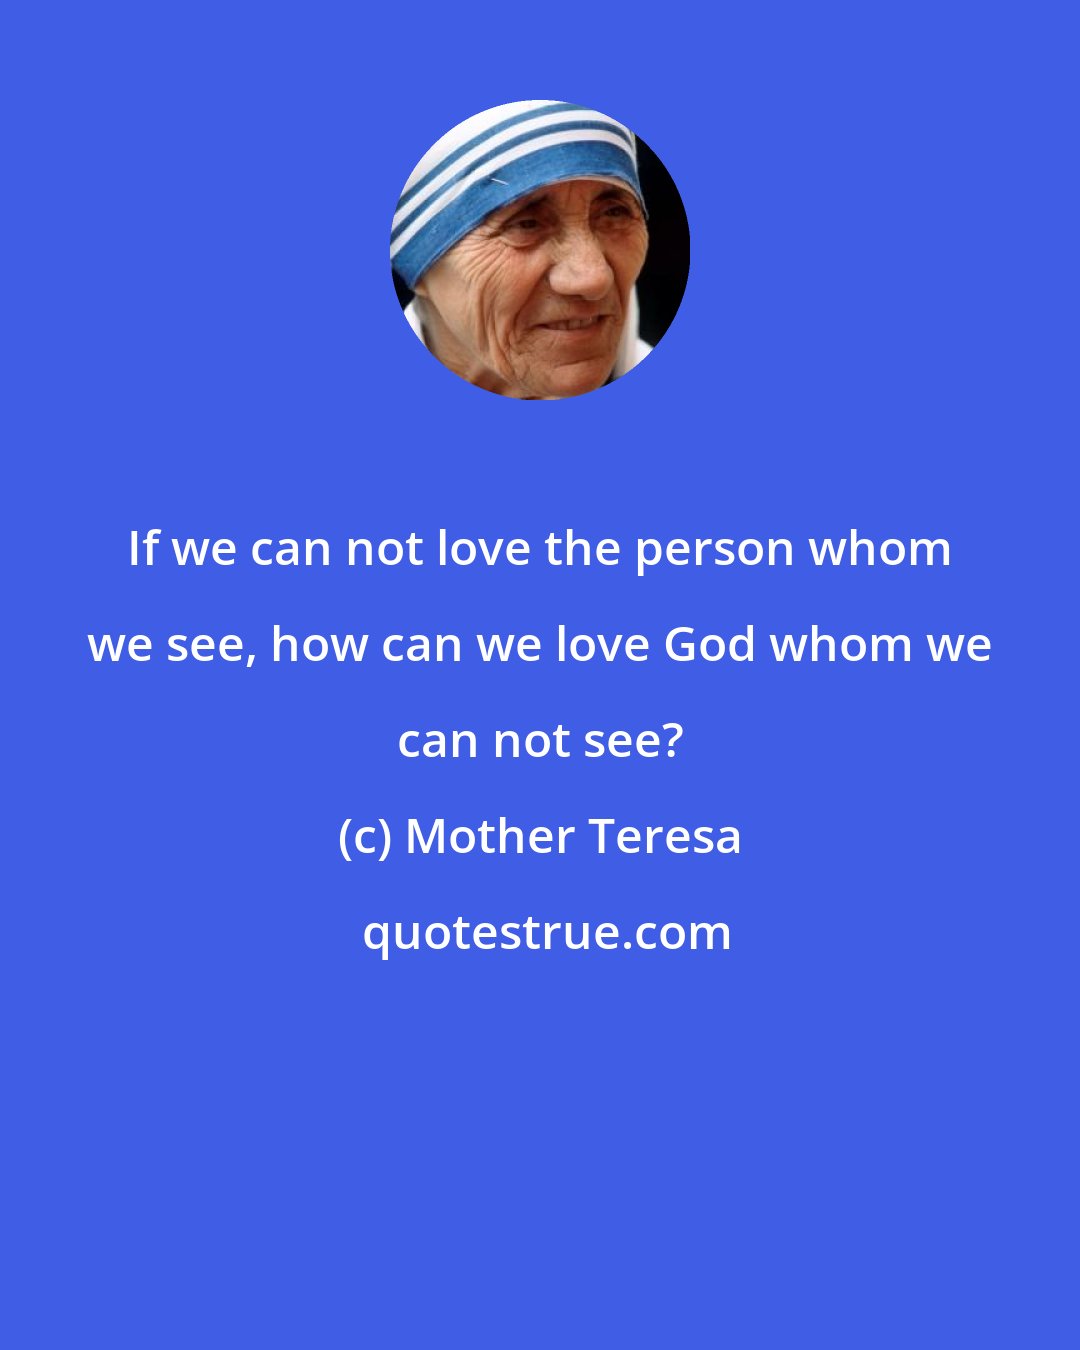 Mother Teresa: If we can not love the person whom we see, how can we love God whom we can not see?